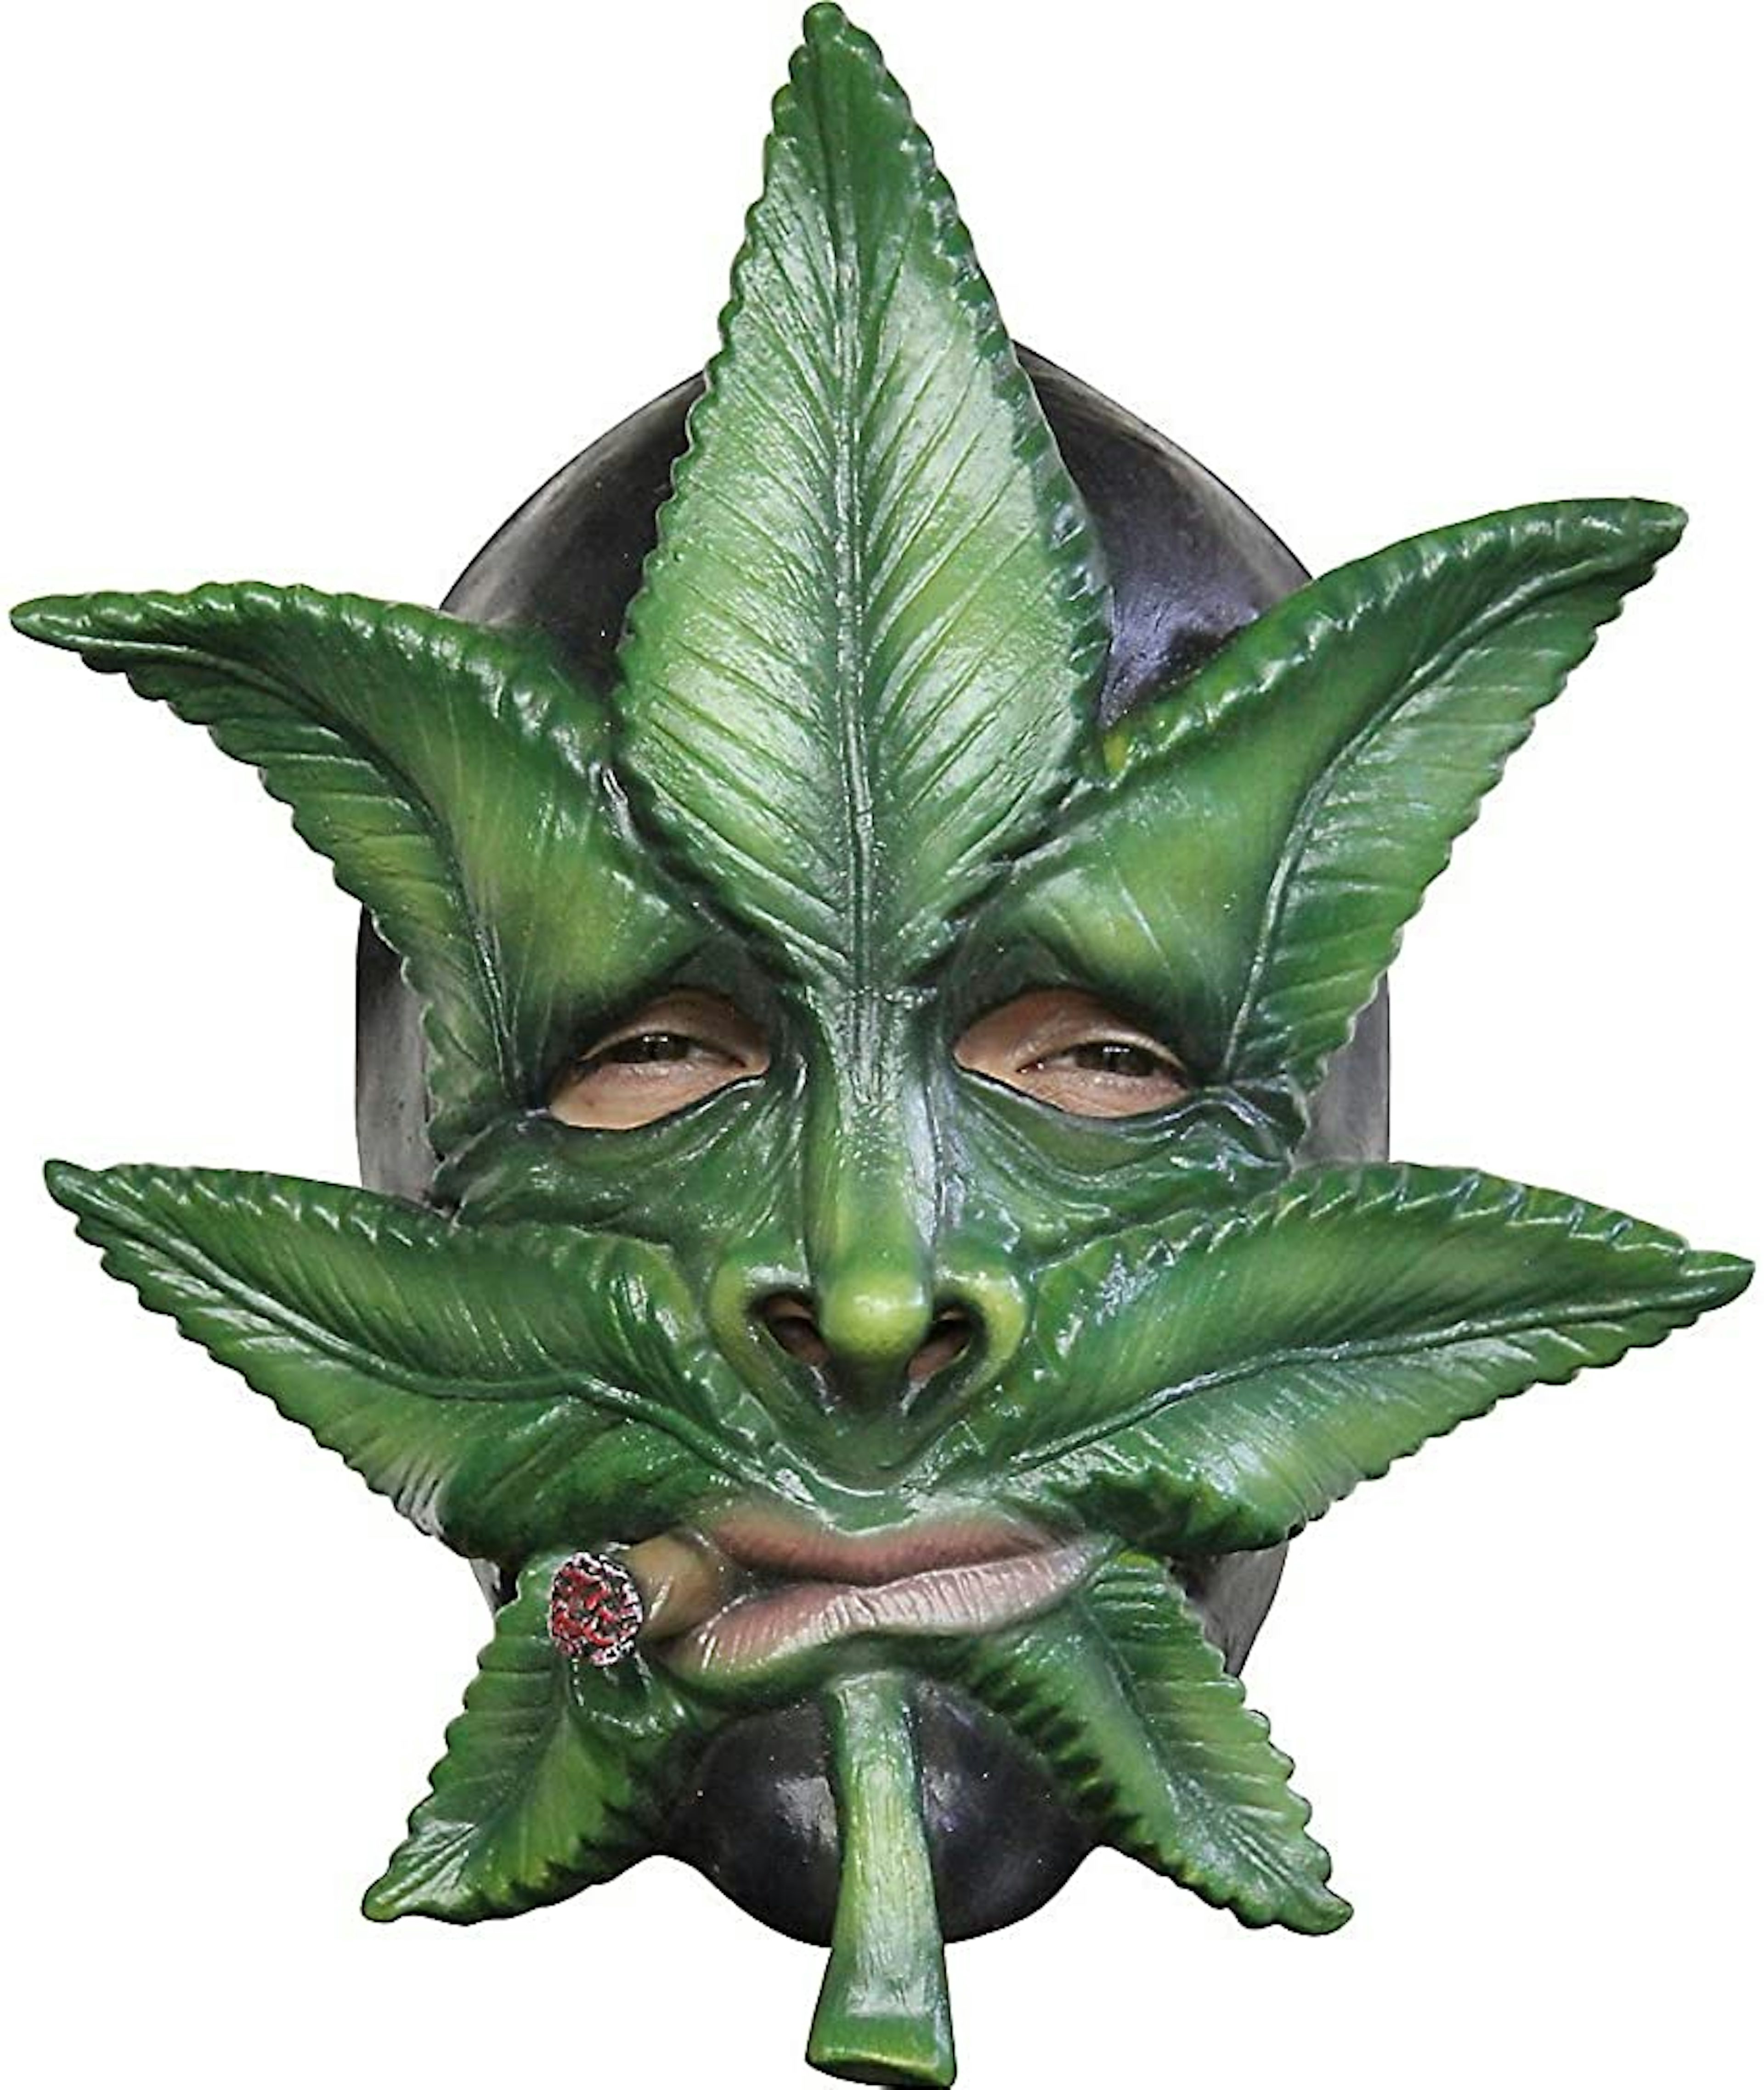 20 Easy and Hilarious Weed Halloween Costume Ideas | Herb